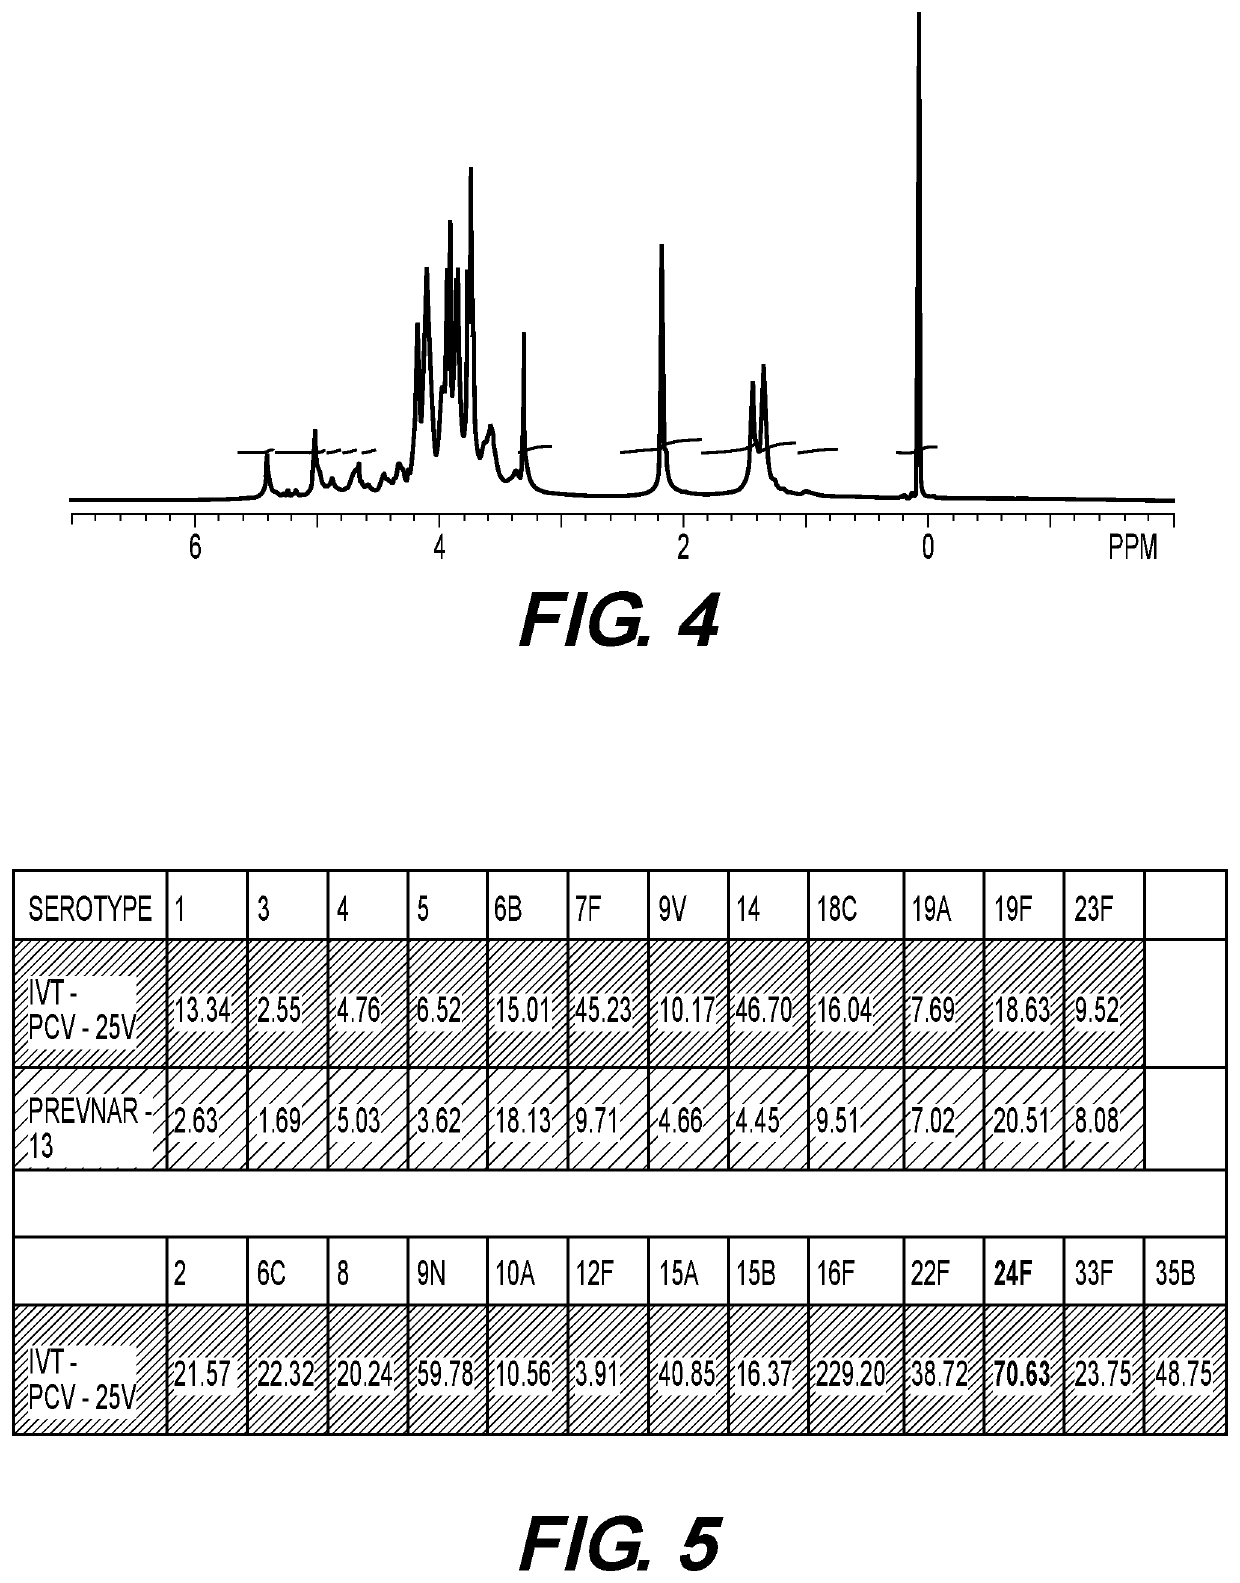 Multivalent Pneumococcal Glycoconjugate Vaccines Containing Emerging Serotype 24F